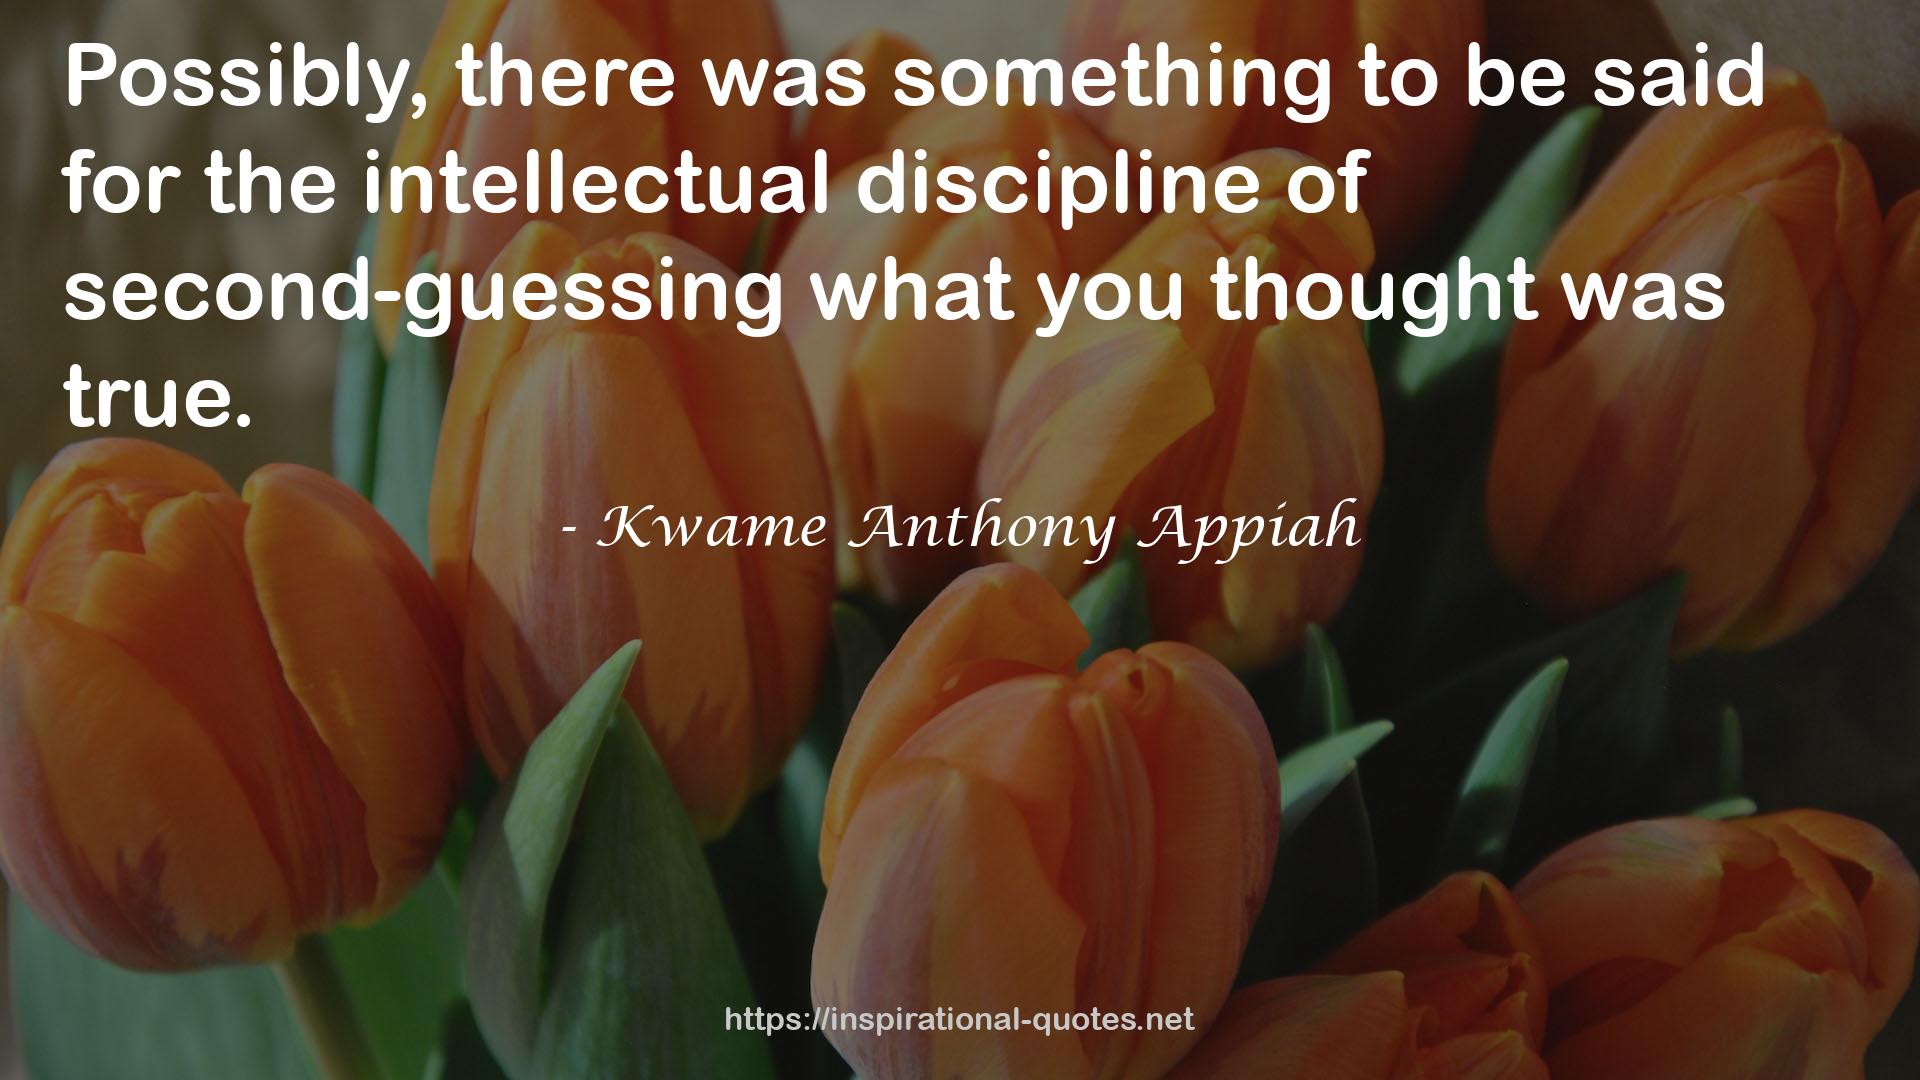 Kwame Anthony Appiah QUOTES